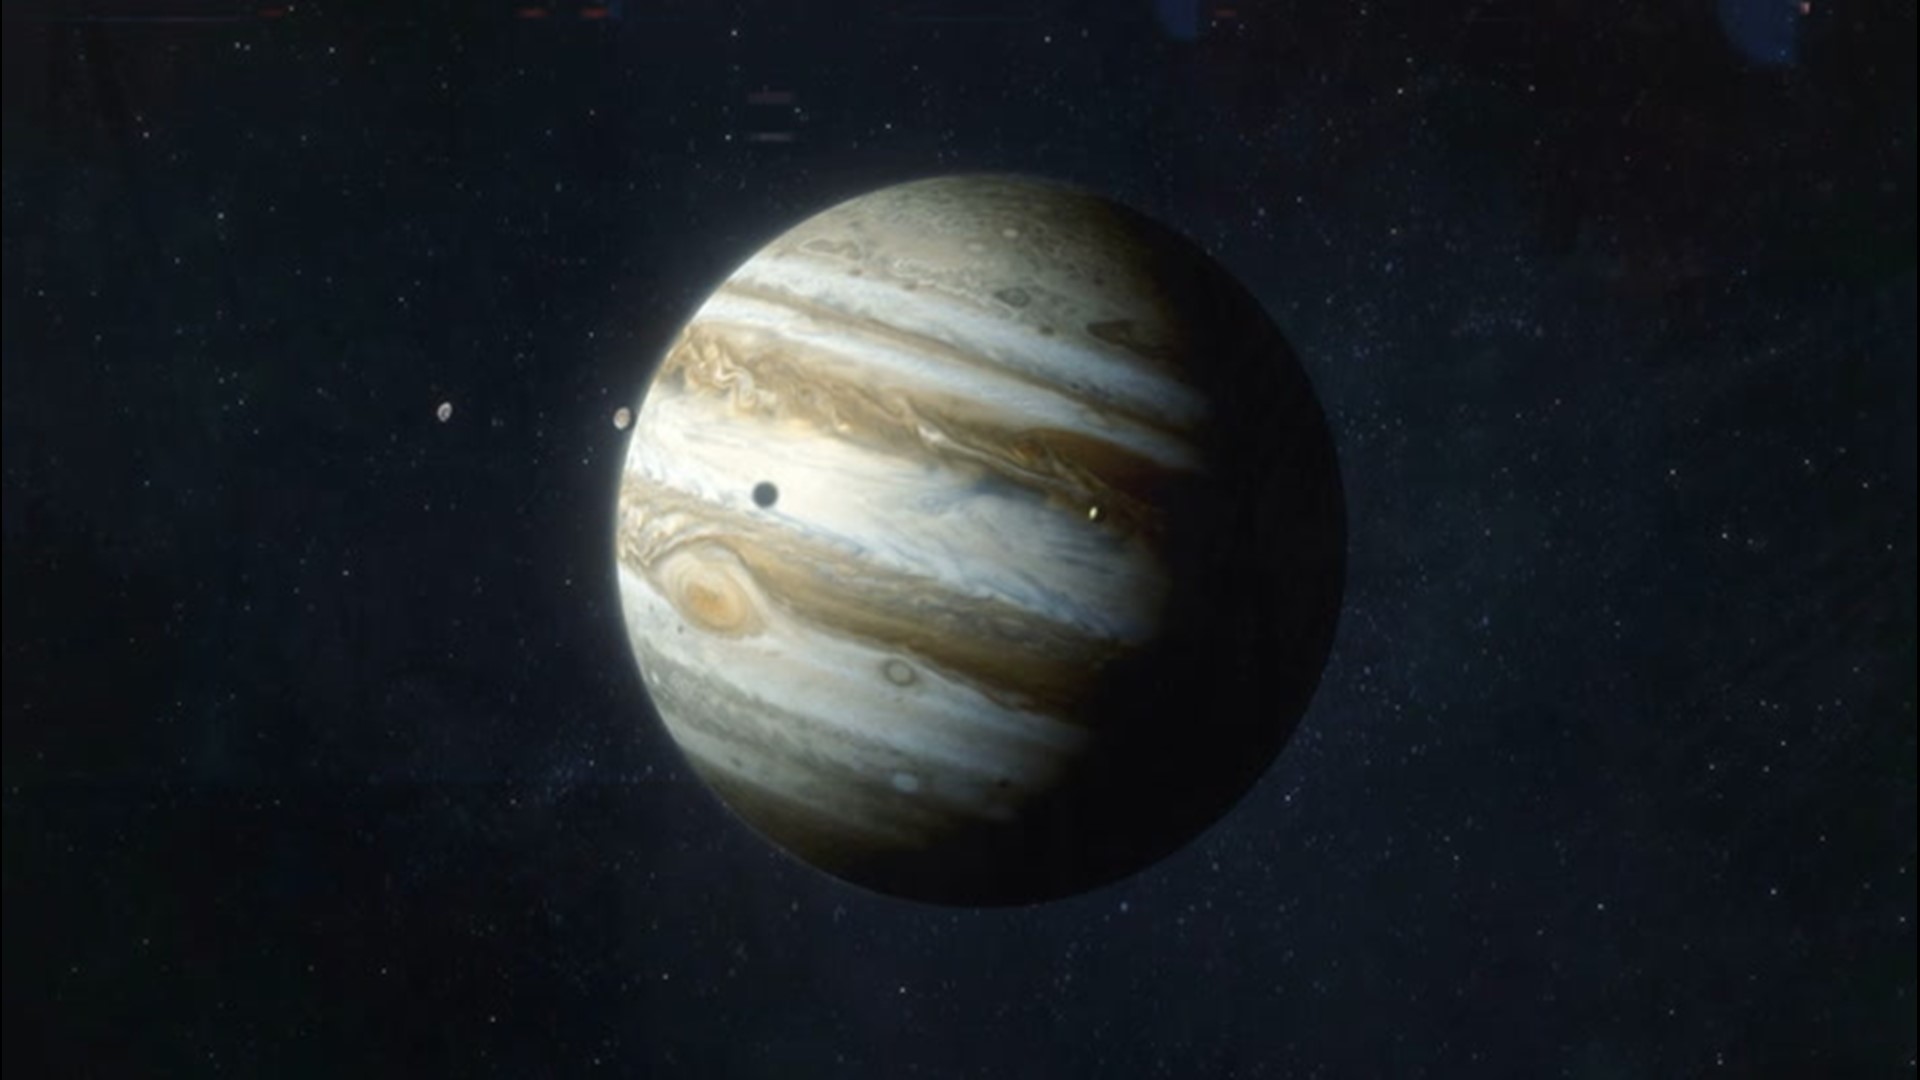 You might have noticed Jupiter outshining many stars this month. The gas giant will reach opposition, its closest encounter to our planet, on July 13-14.